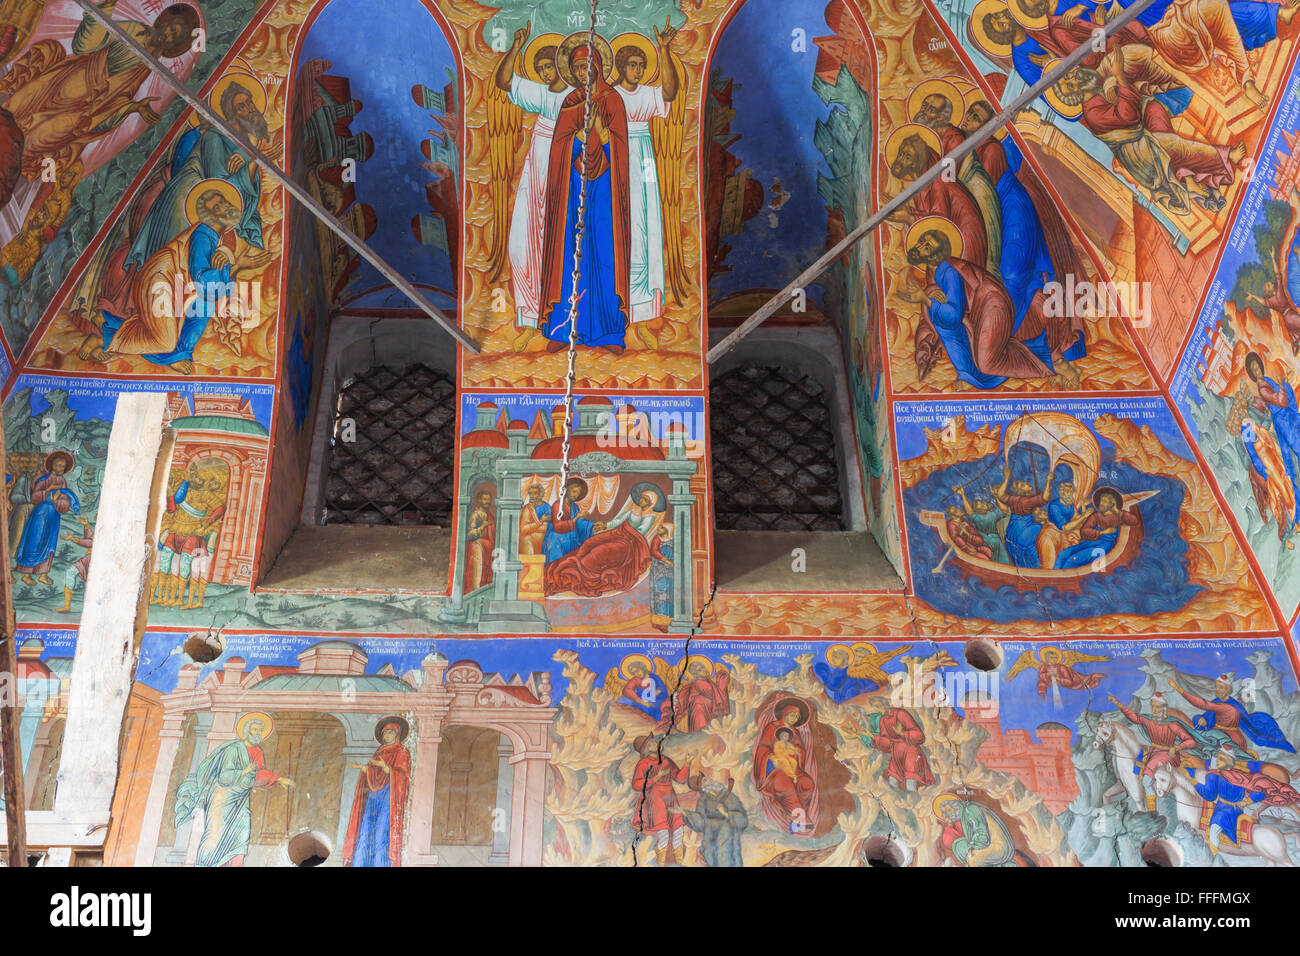 Mural painting in the church, convent of Nativity of Holy Virgin, Rostov, Yaroslavl region, Russia Stock Photo